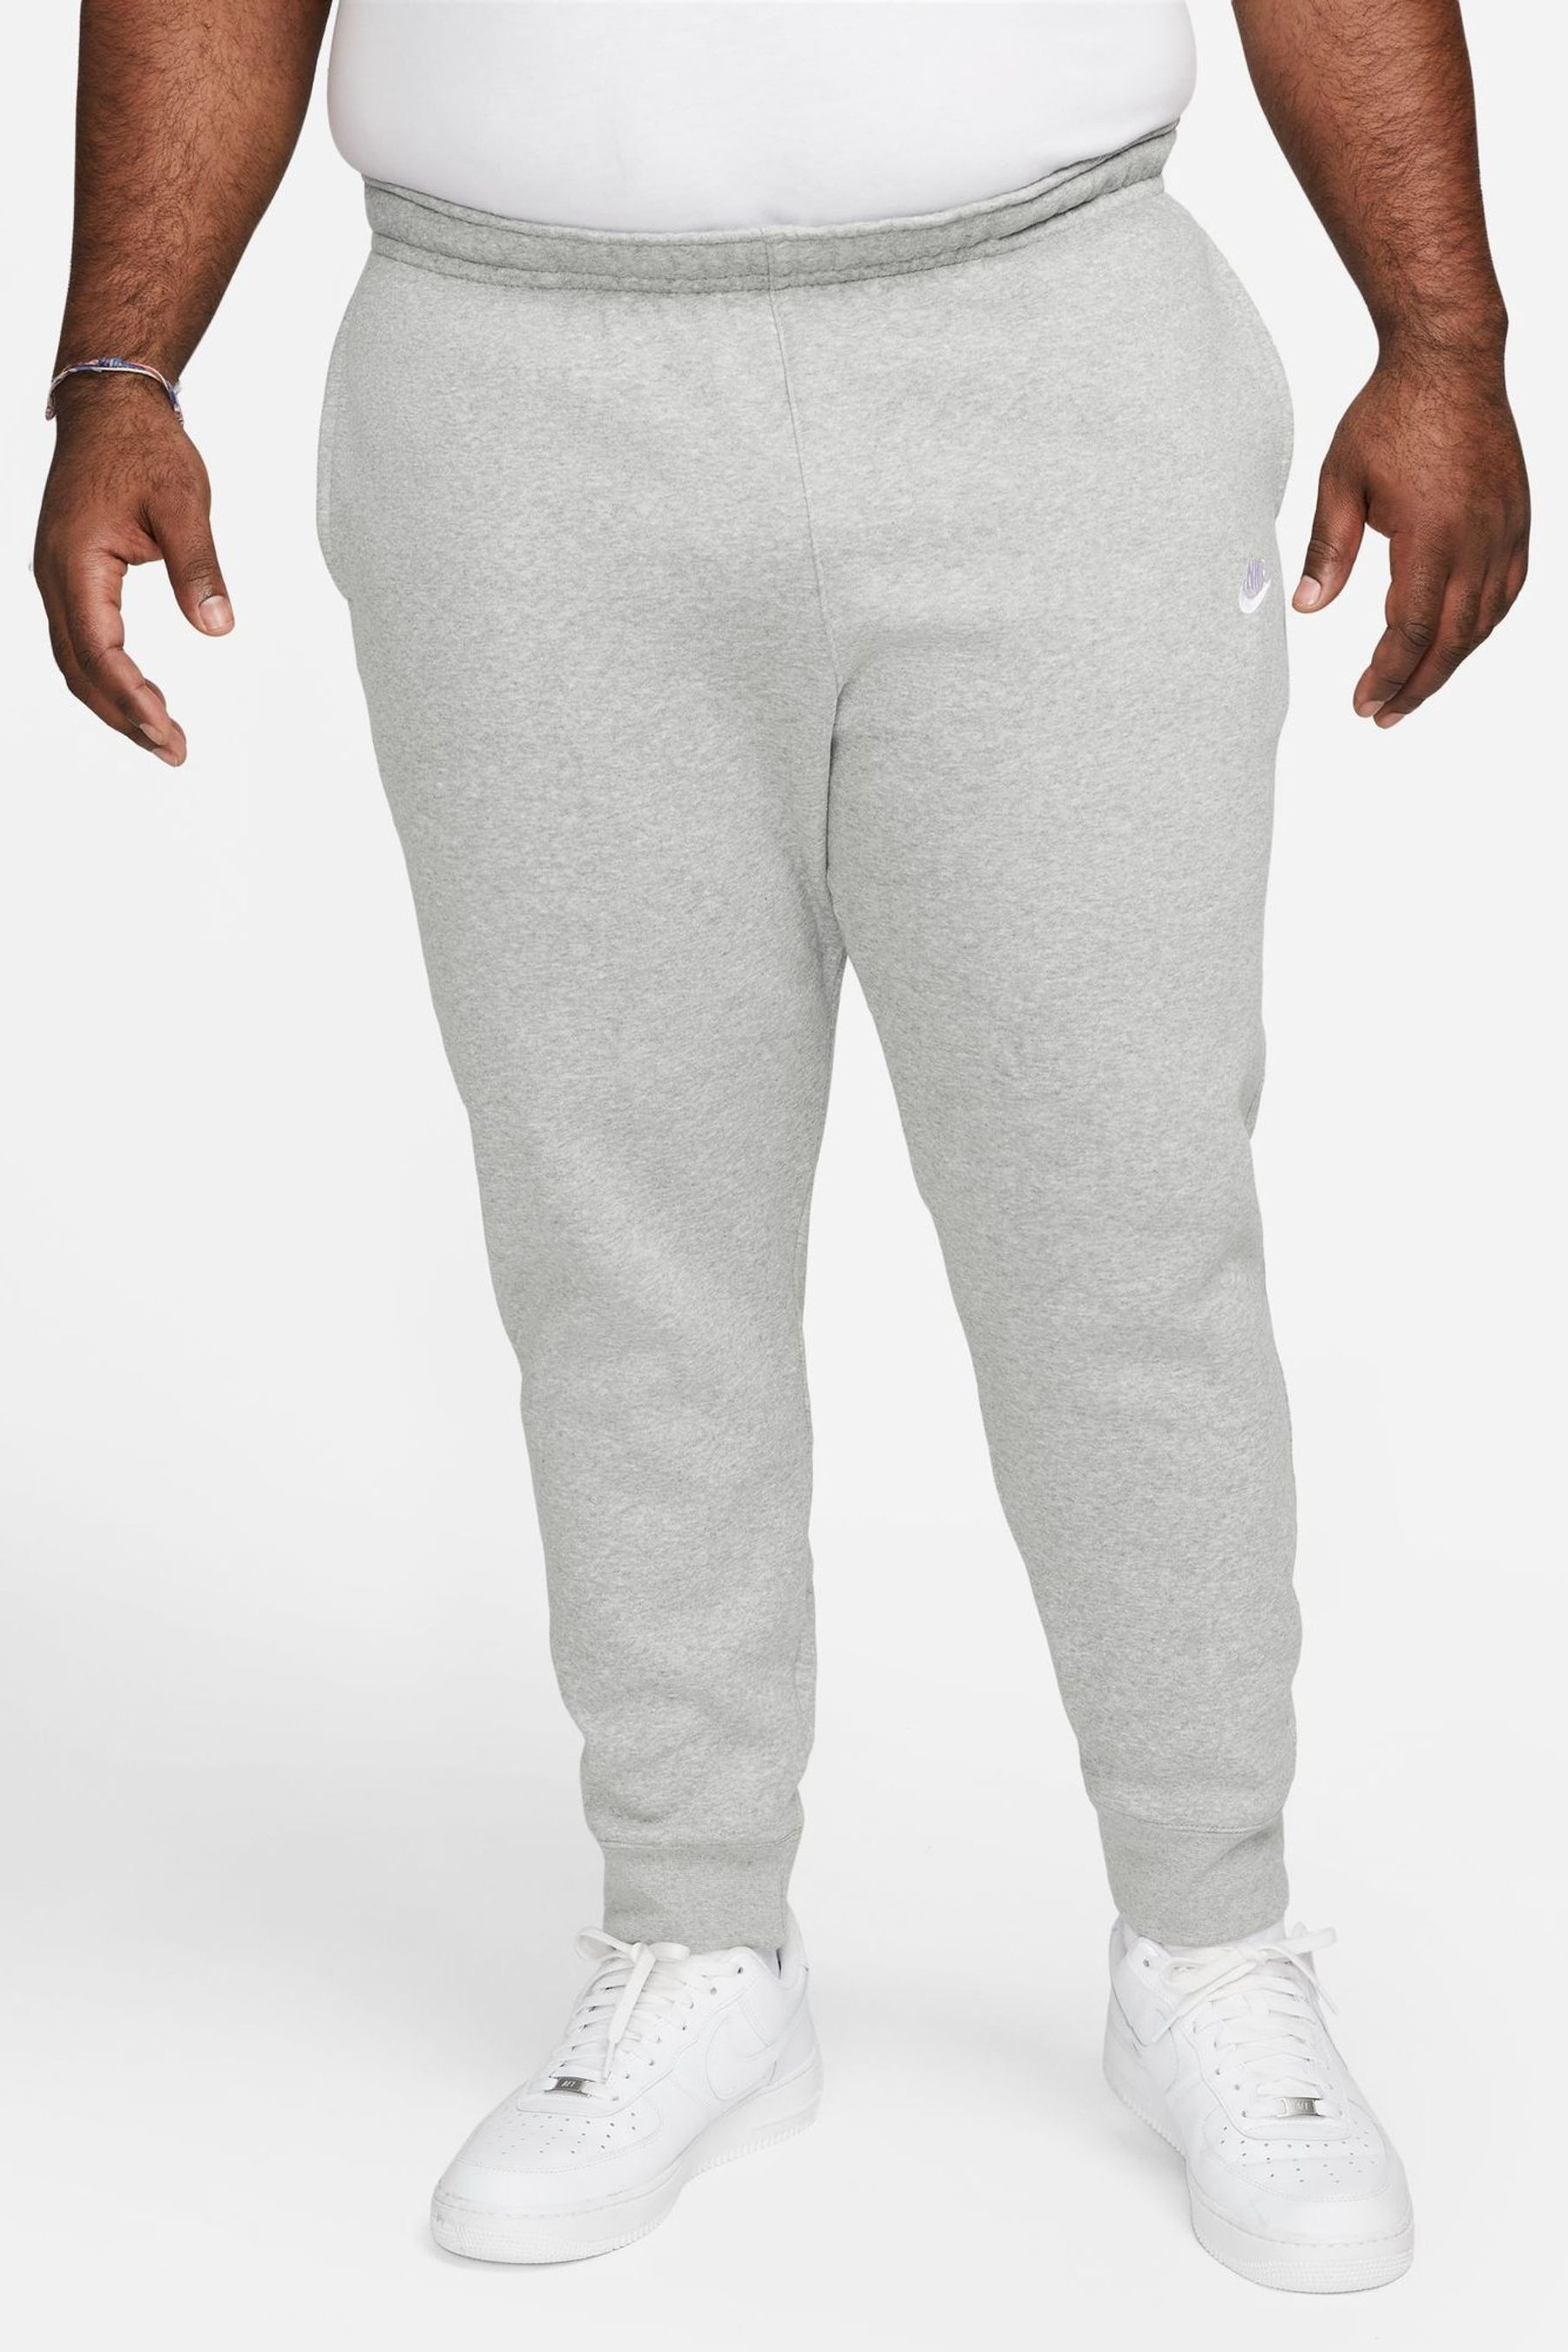 Buy Nike Grey Club Joggers from the Next UK online shop